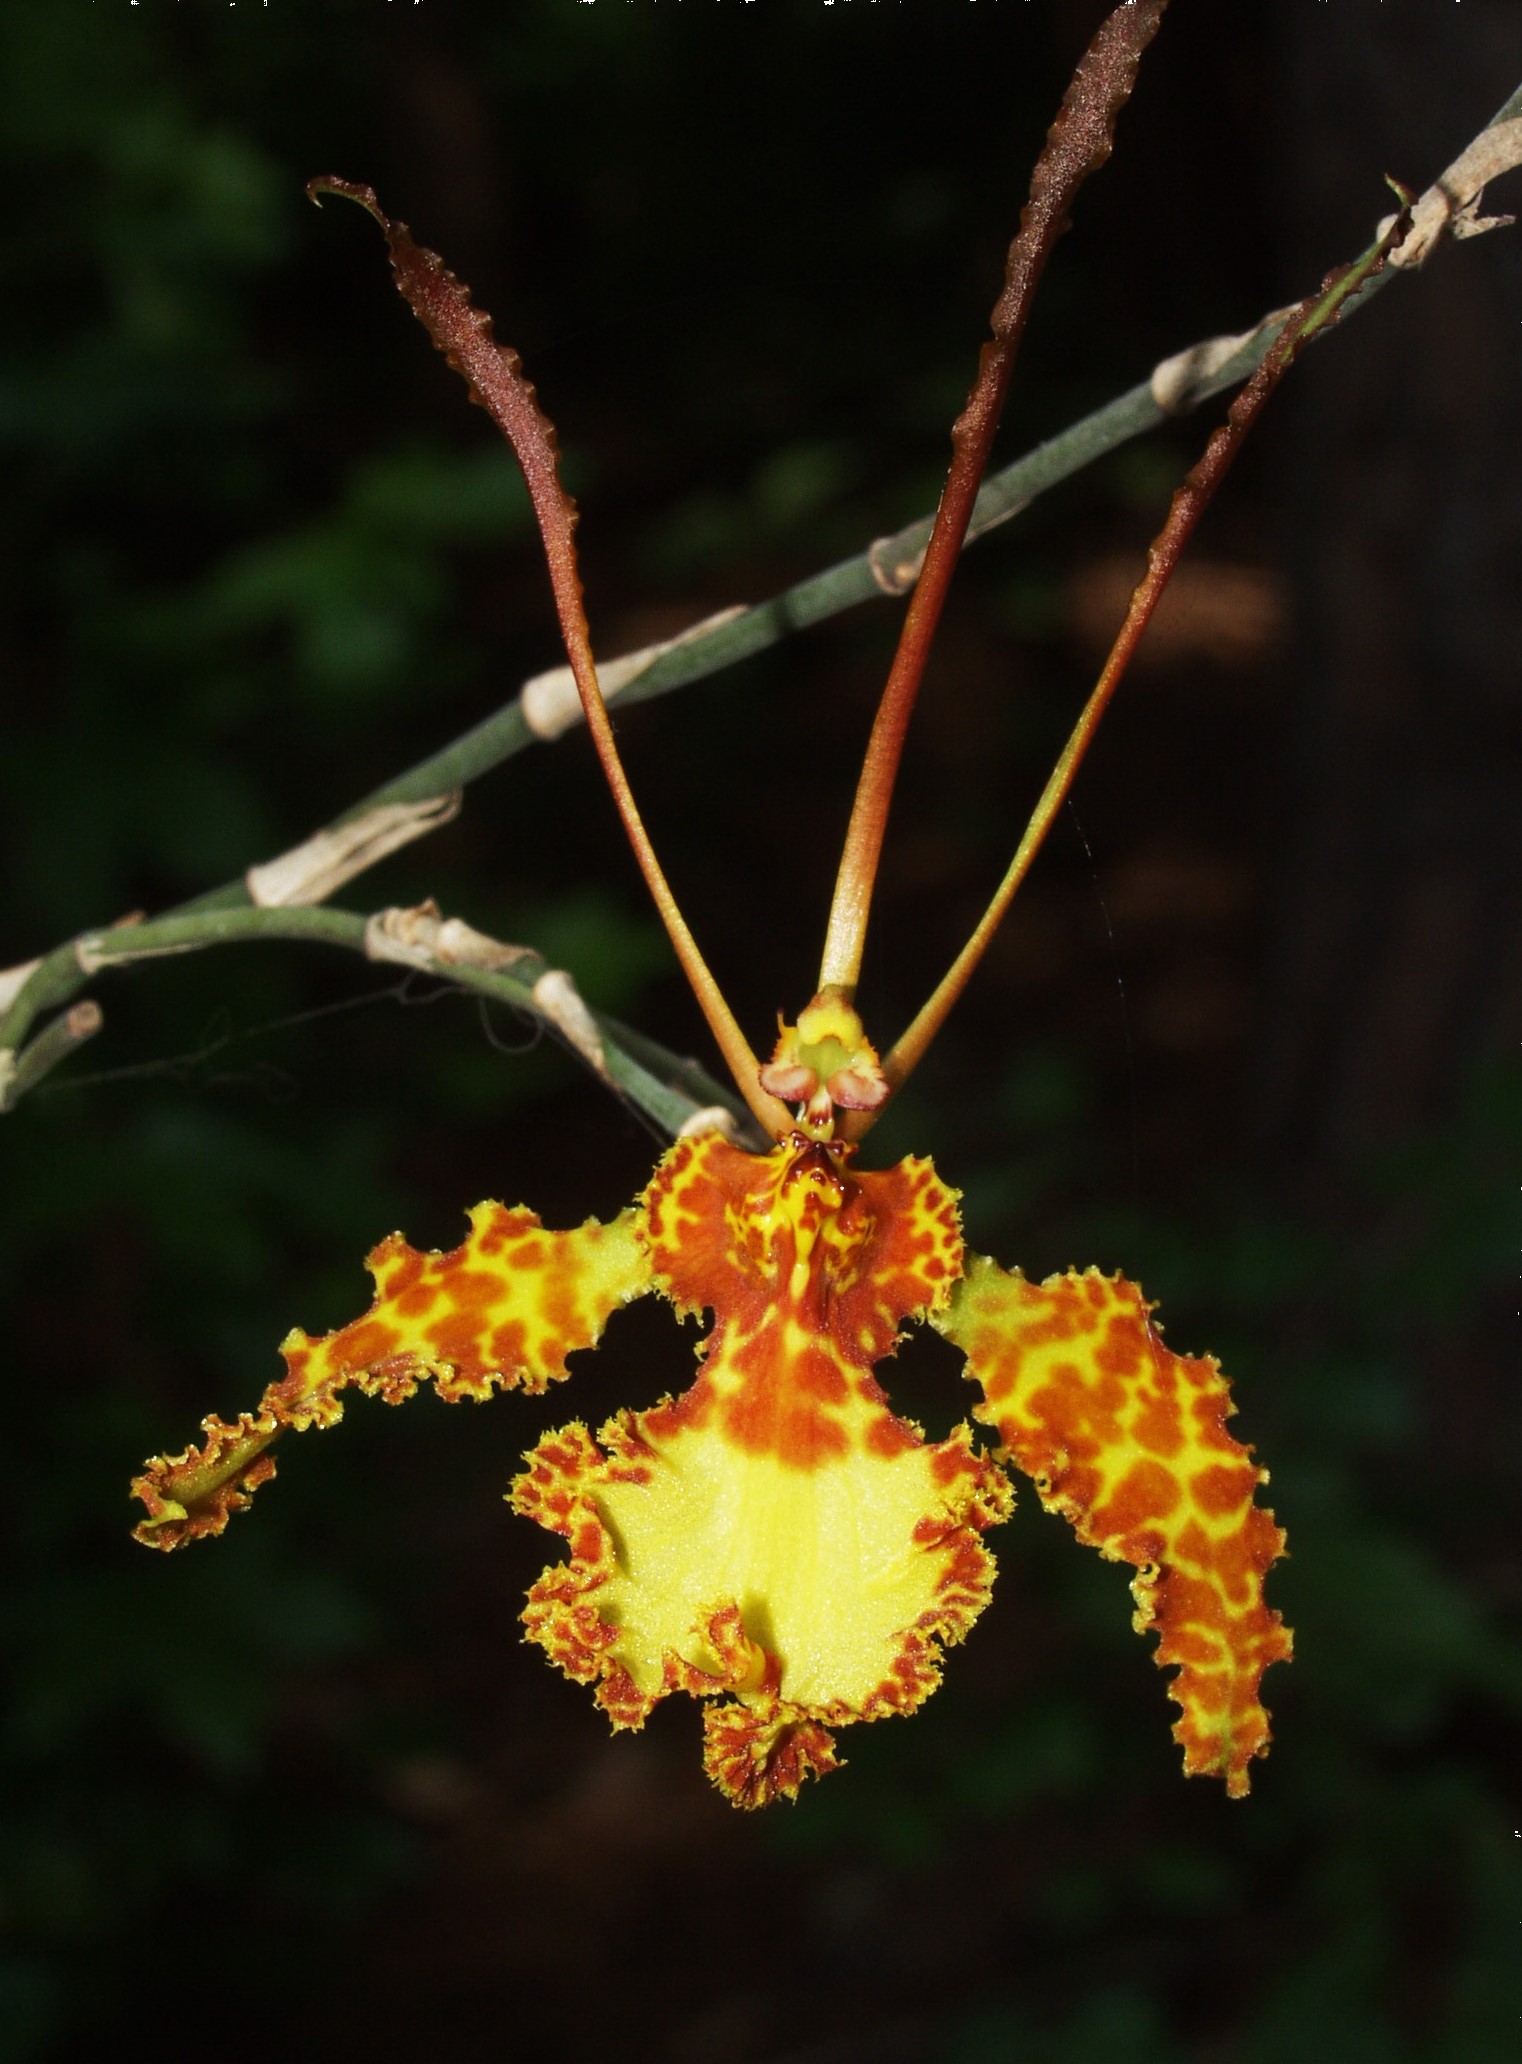 A psychopsis flower that is similar to the above, except that the lip is more ruffled